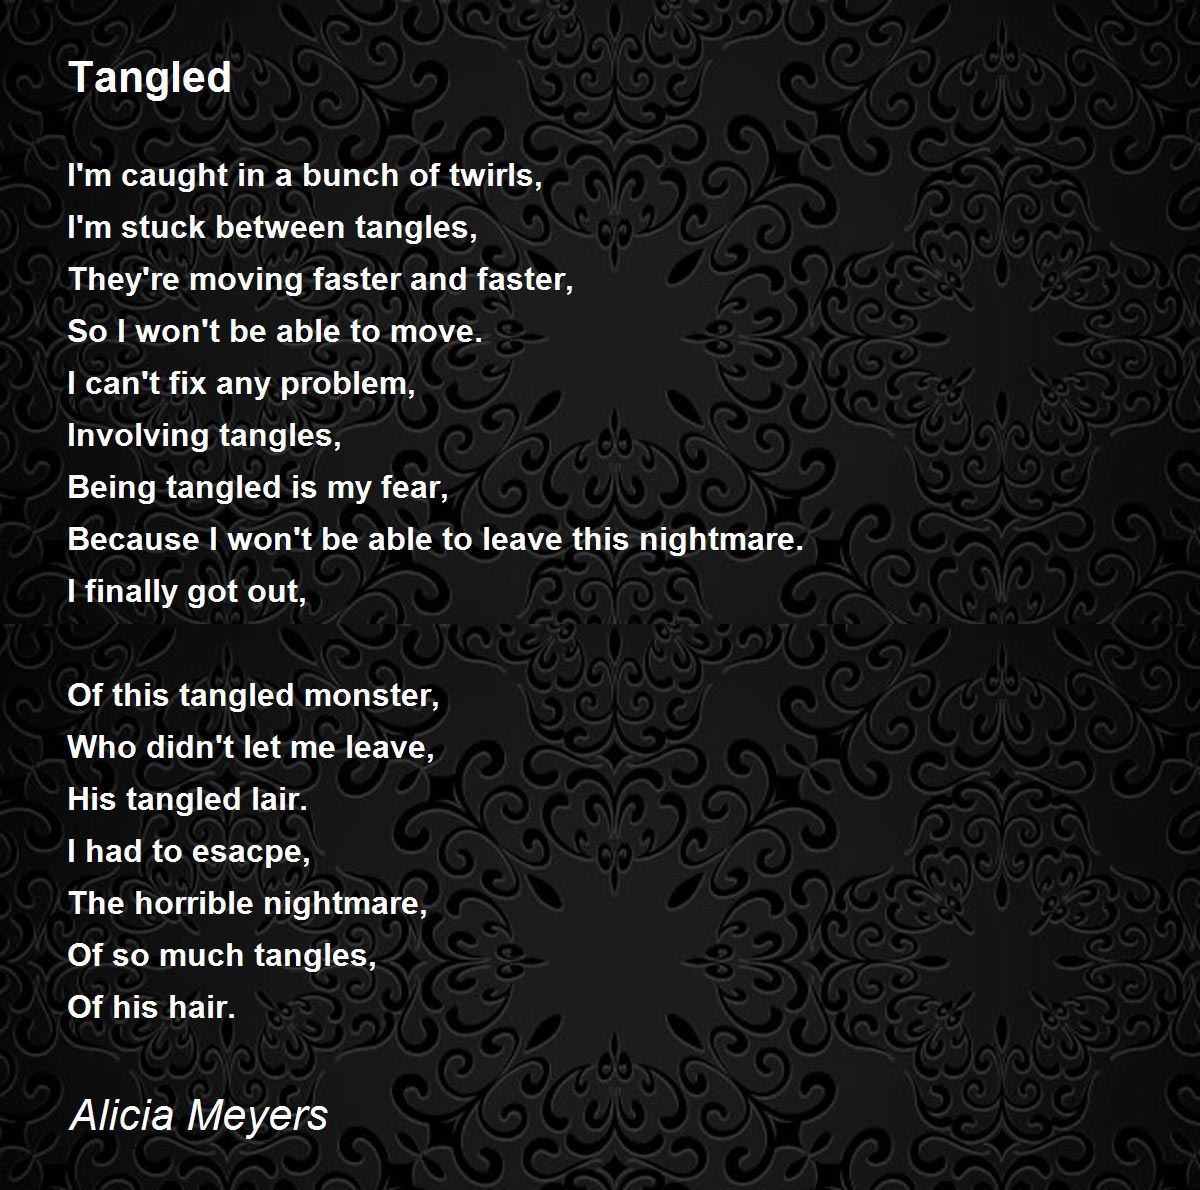 Tangled - Tangled Poem by Alicia Meyers